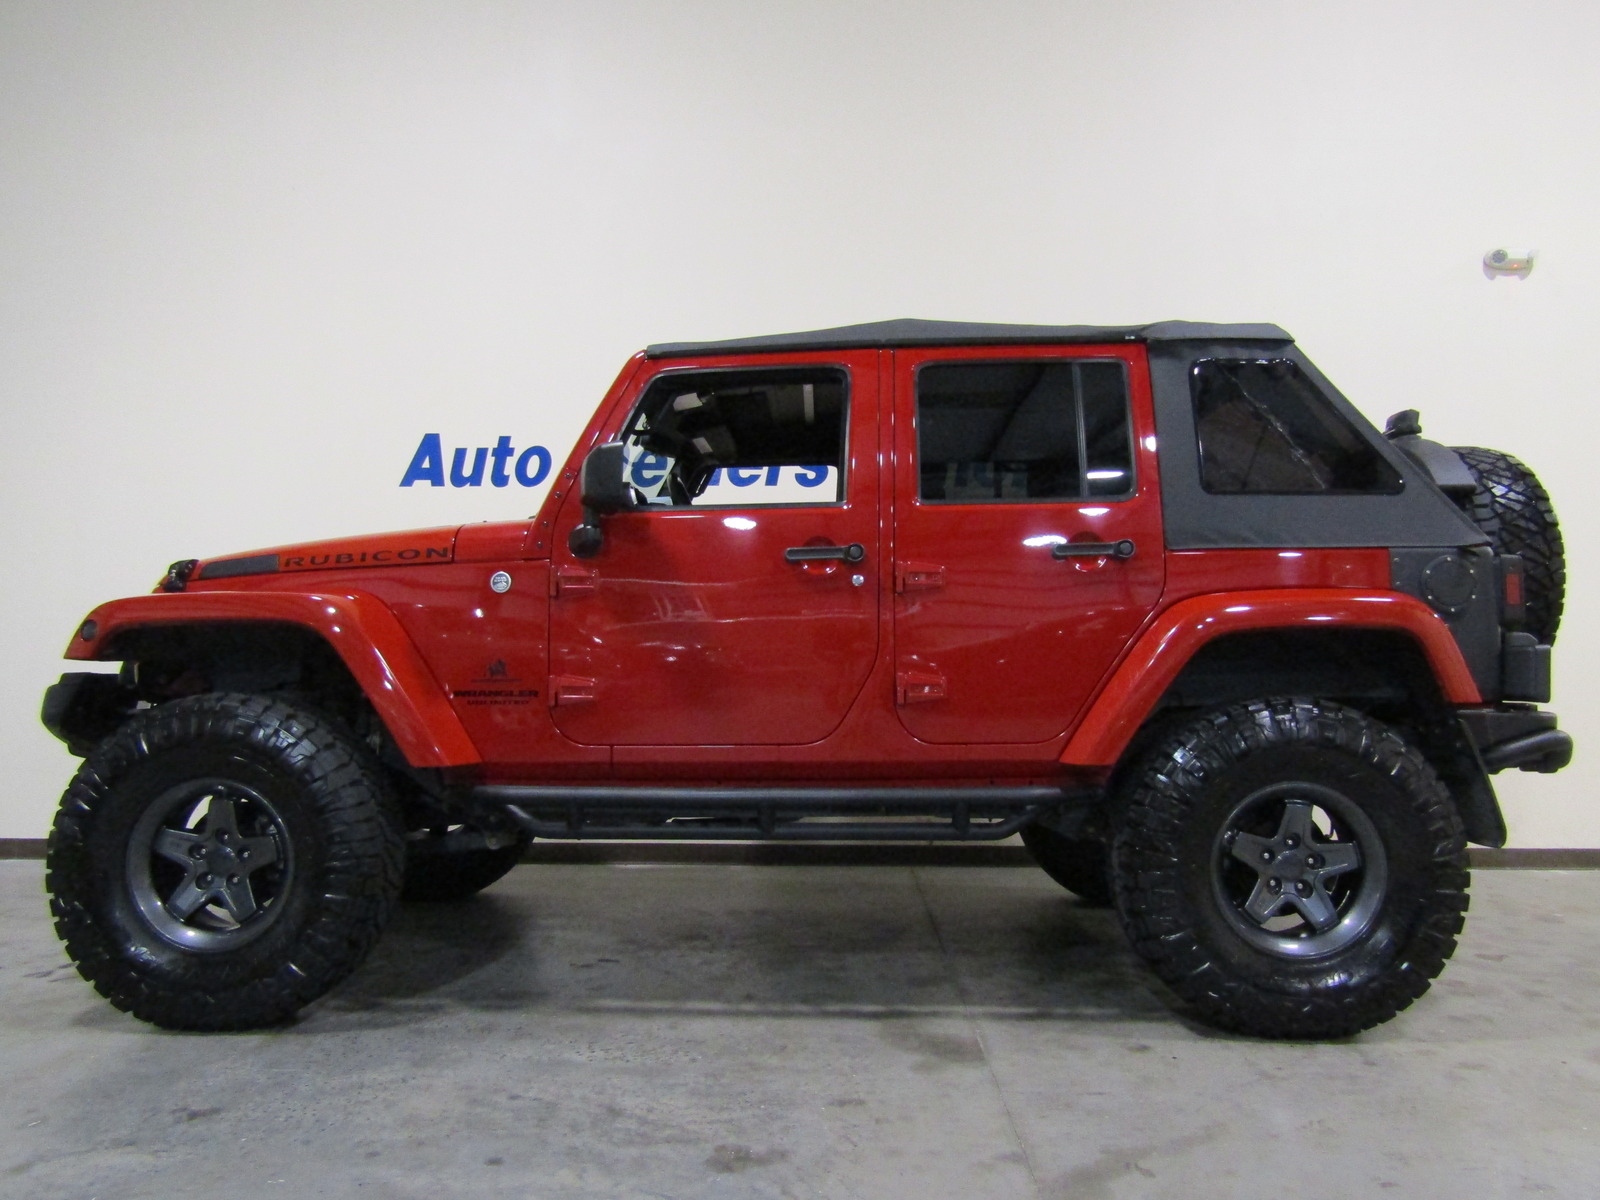 Used Jeep Wrangler for Sale in Tallahassee, FL - Autotrader